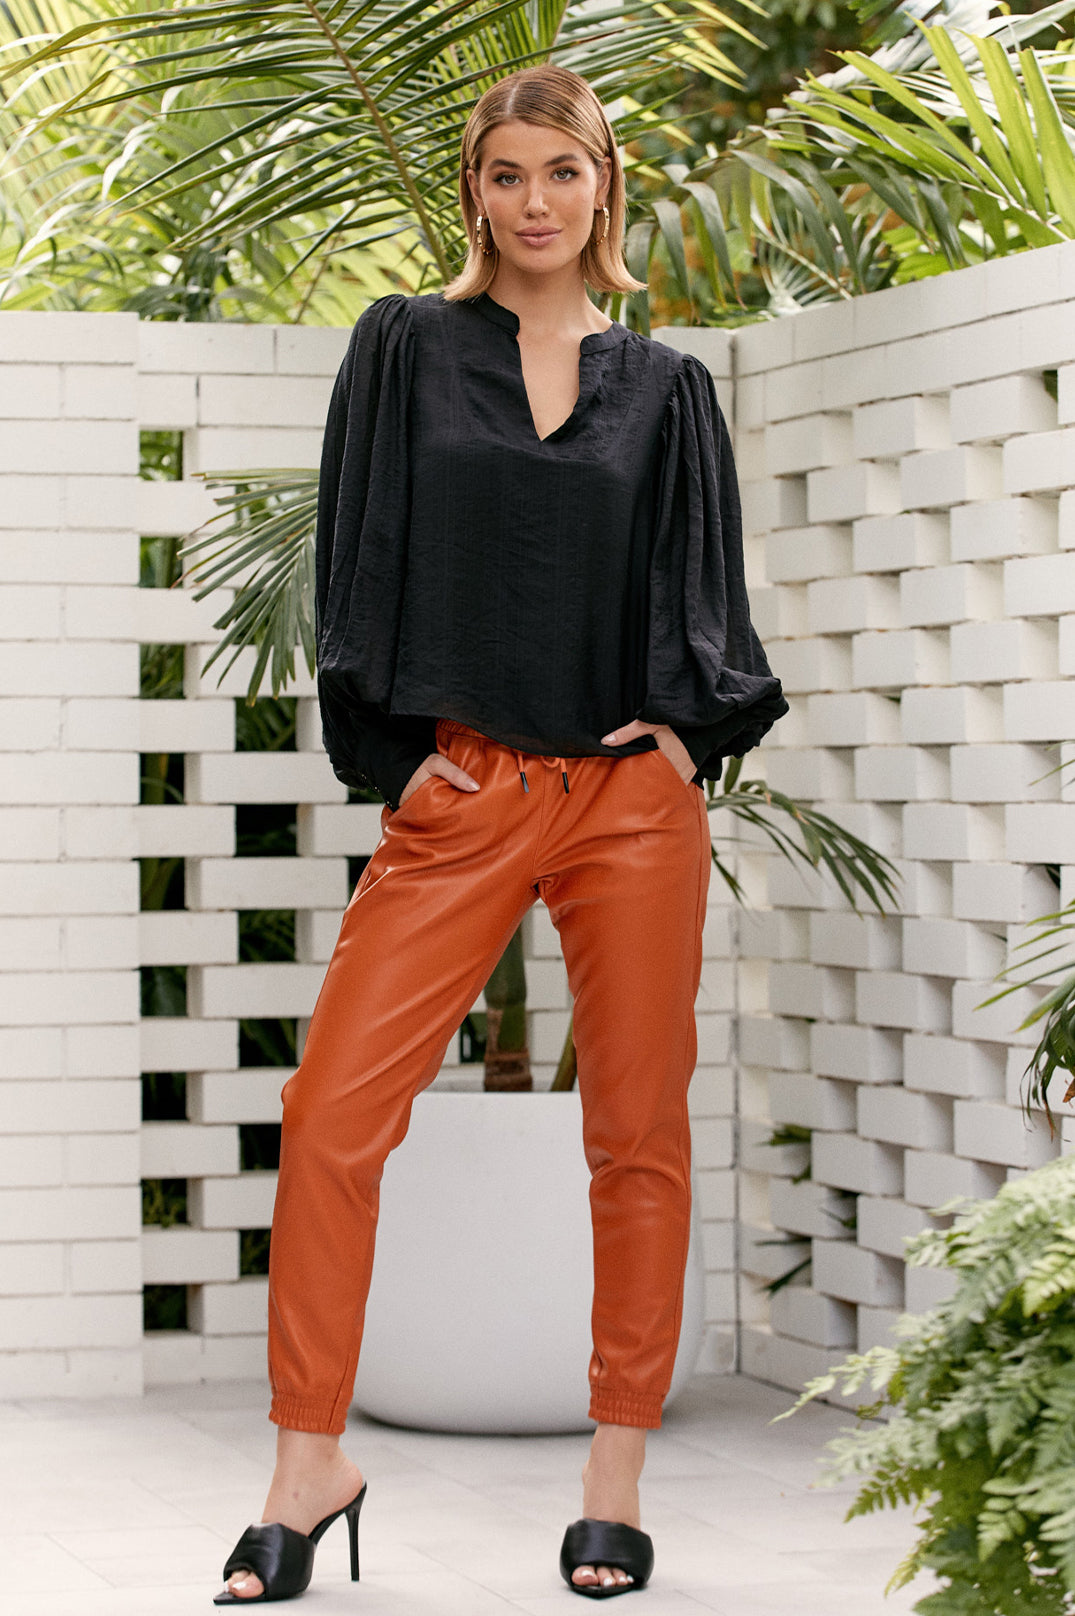 Orange Pants for Spring - Somewhere, Lately | Trending fashion outfits,  Fashion, Hipster outfits